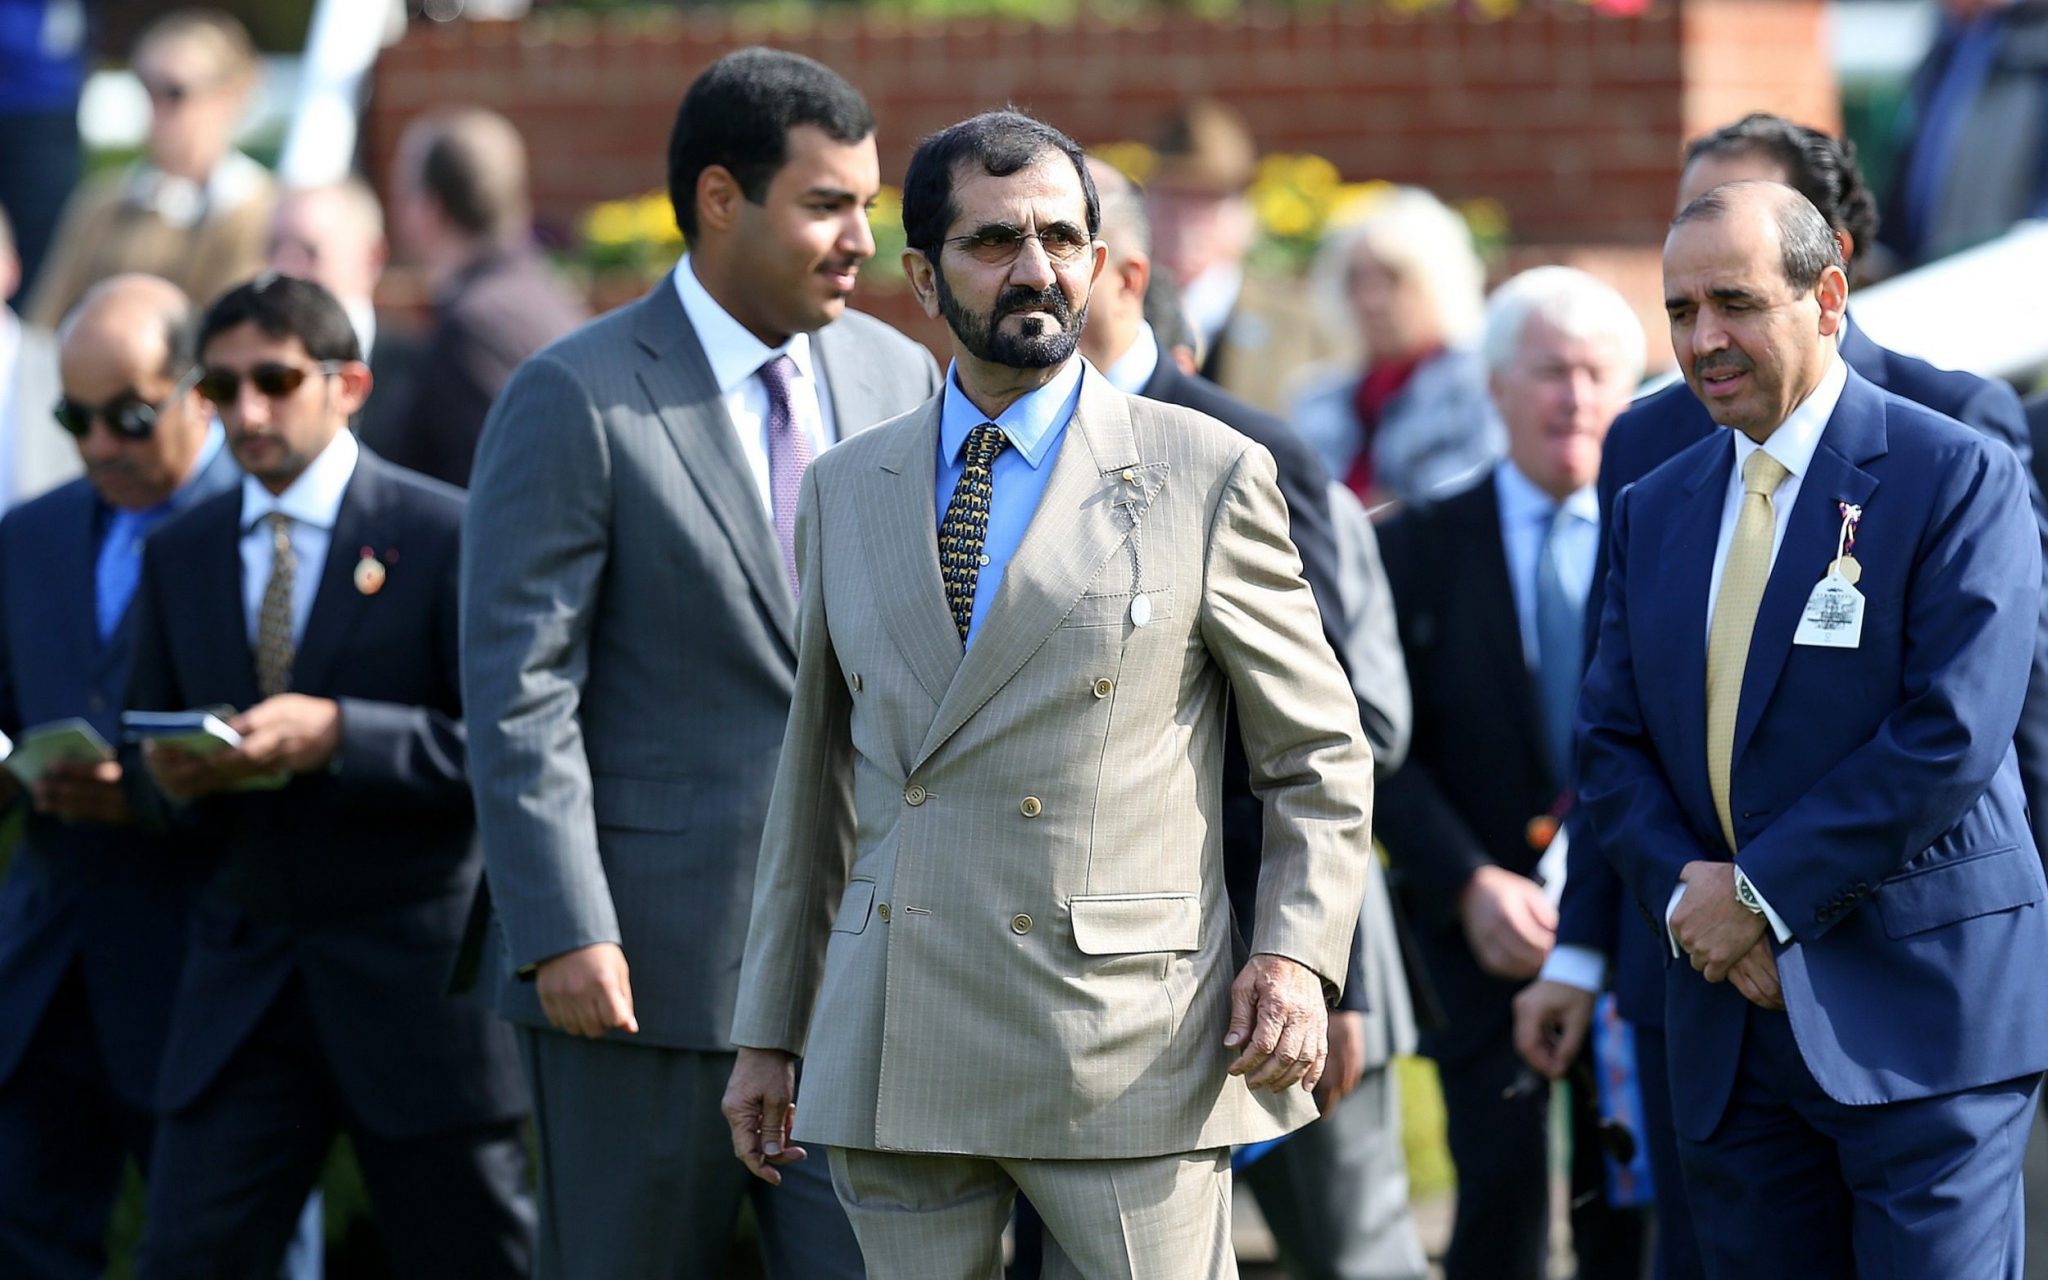 In Sheikh Mohammed the UK has a great friend – we should be more appreciative of his kindness